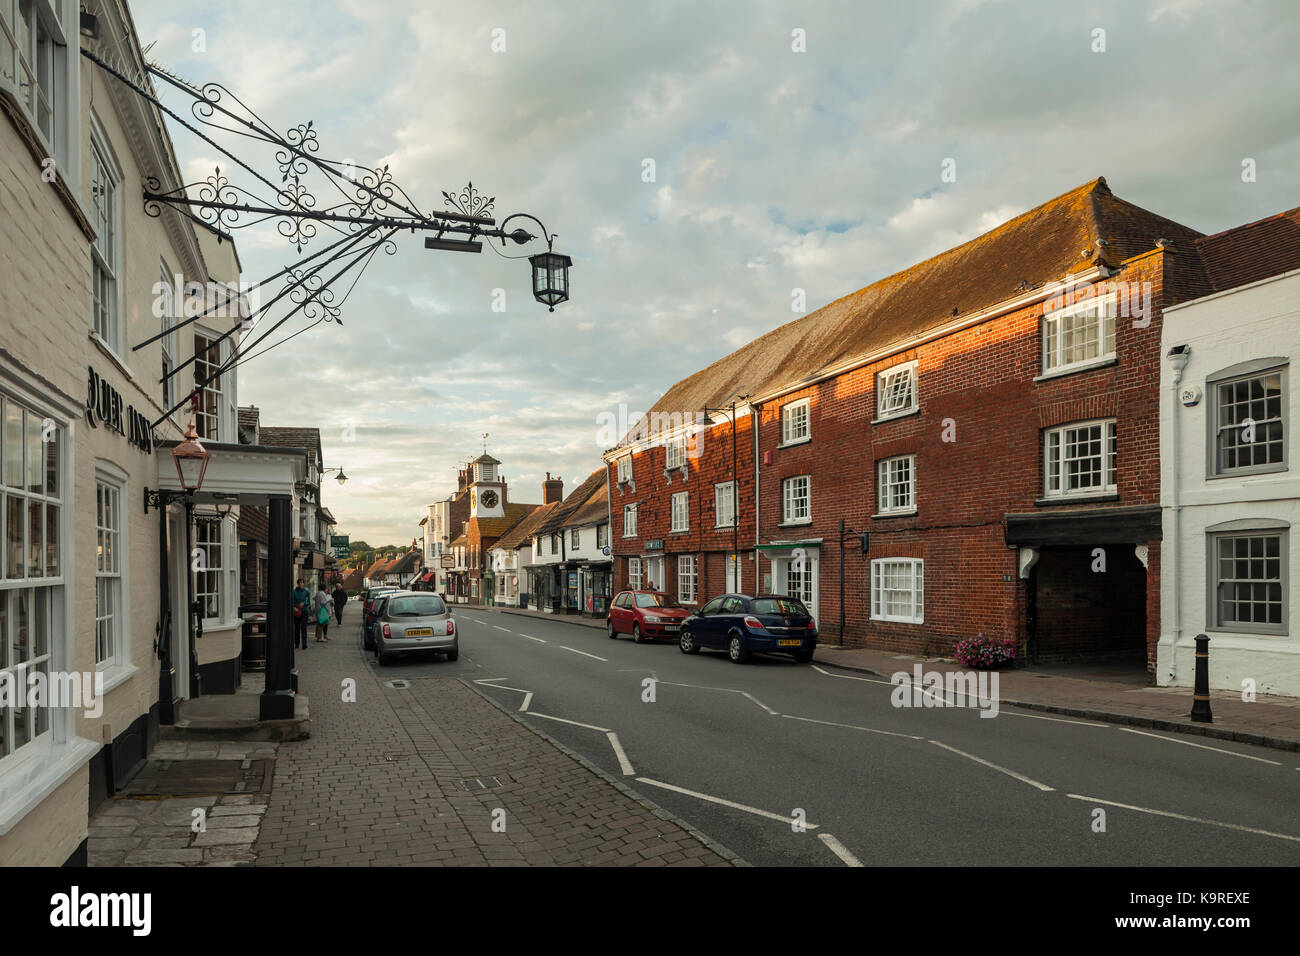 Summer evening on High Street in Steyning, West Sussex. Stock Photo